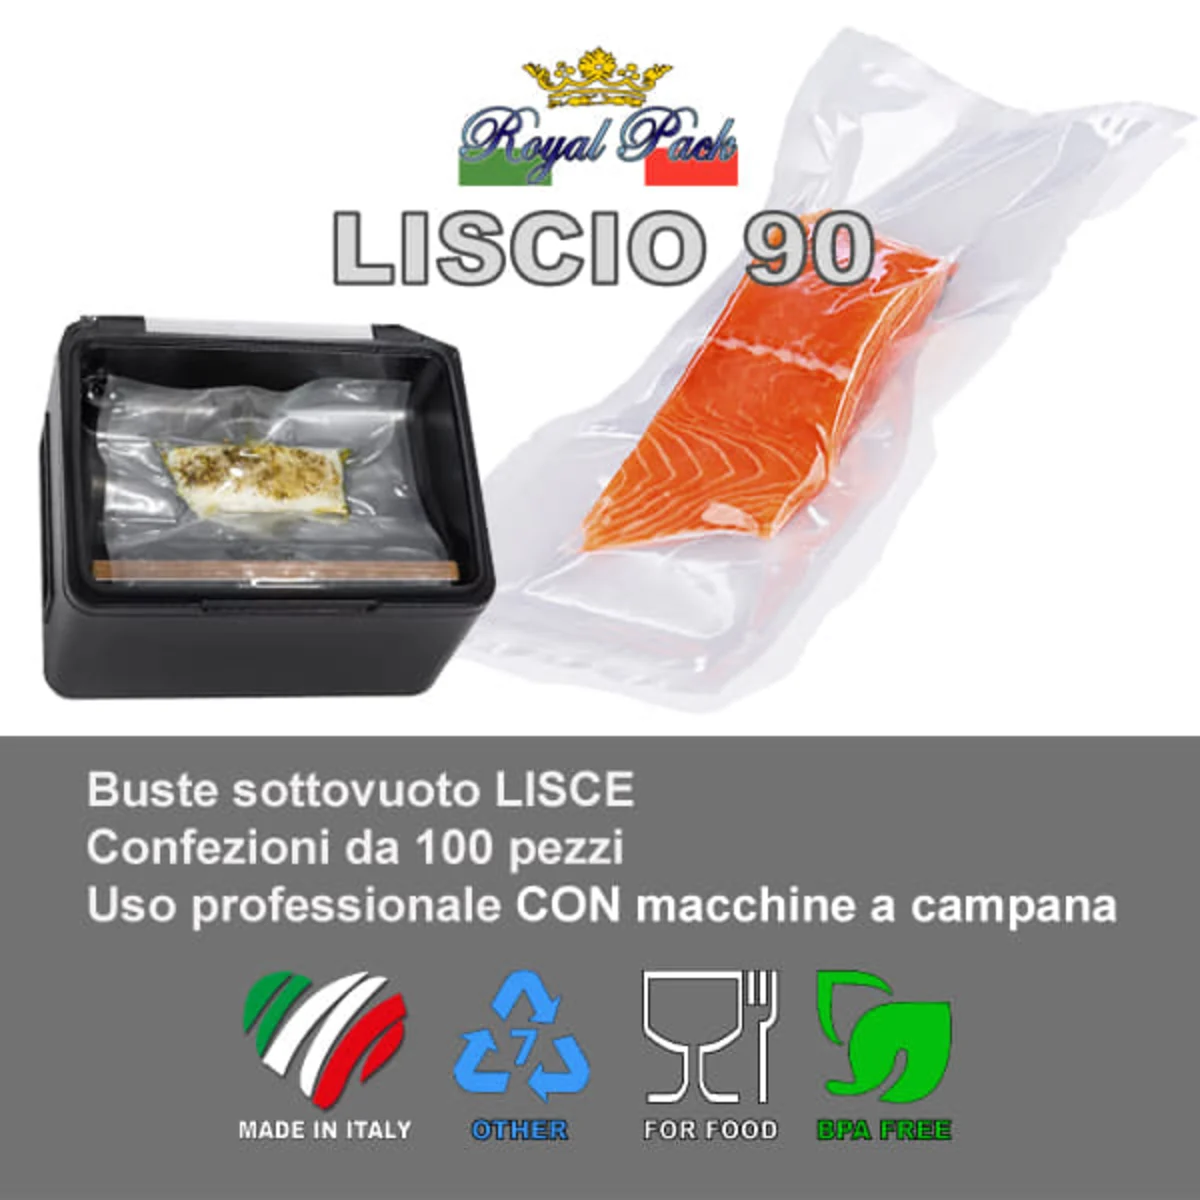 Royal Pack buste sottovuoto lisce 90 micron